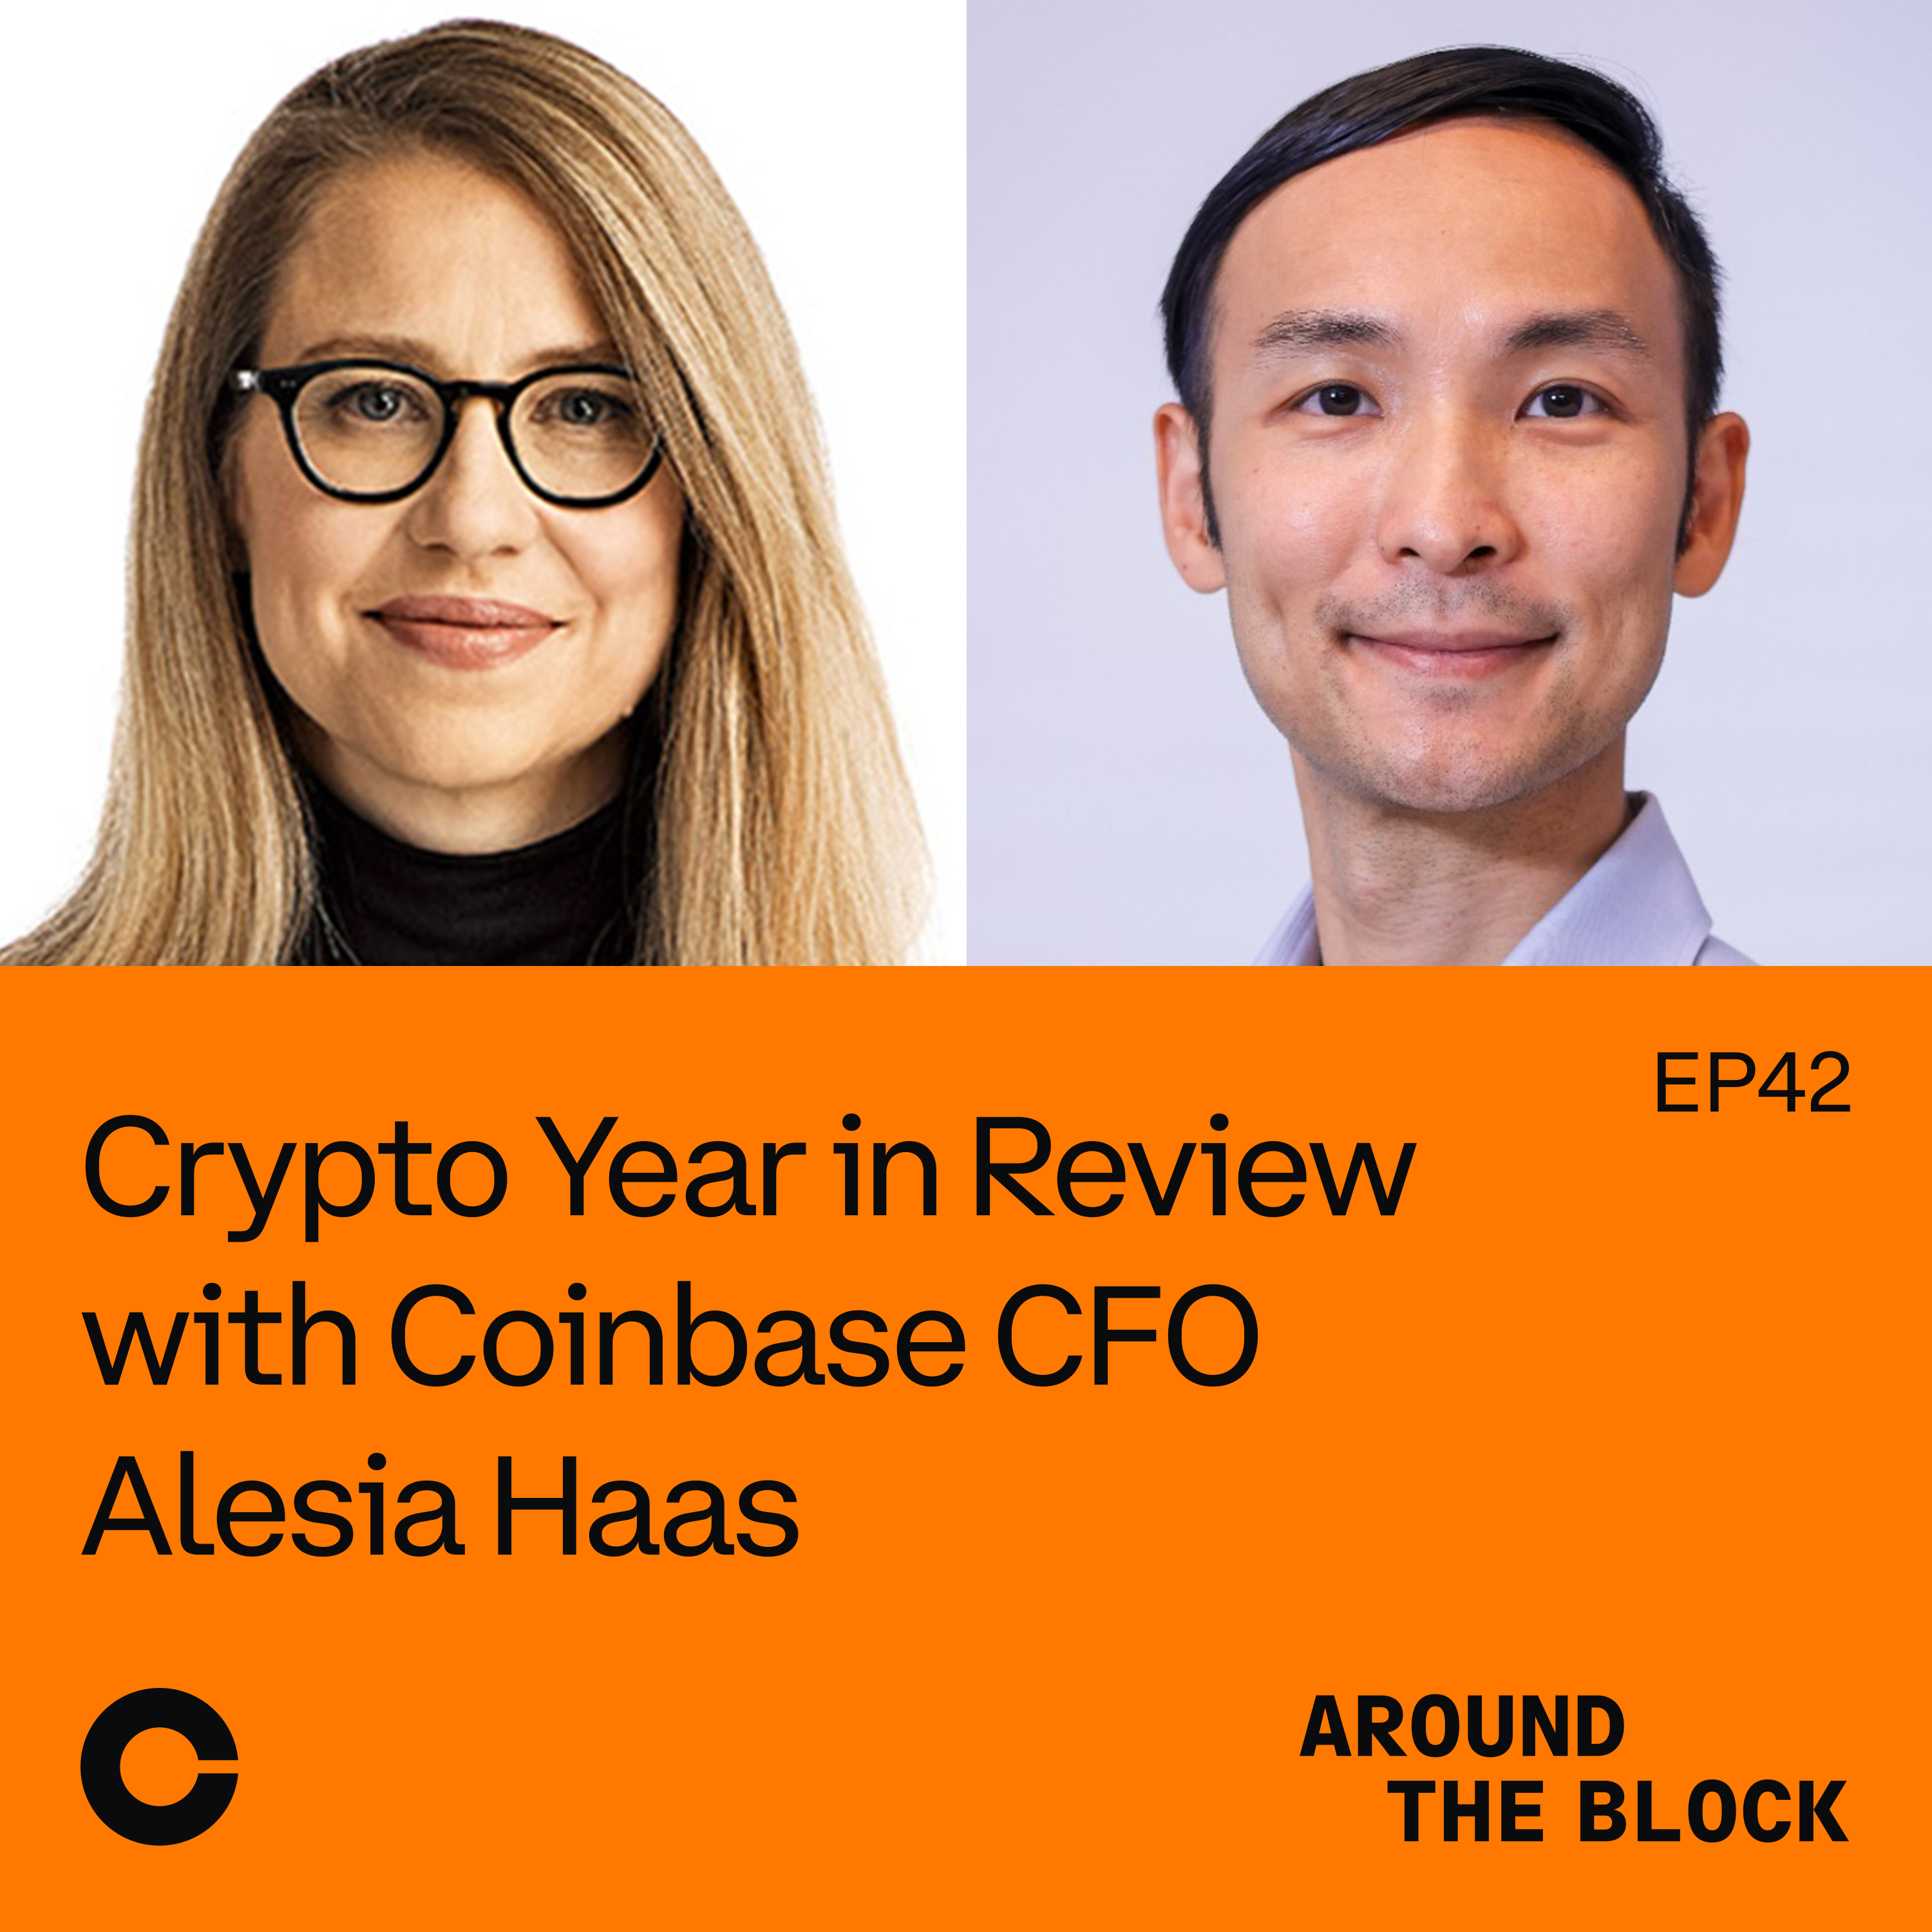 Coinbase CFO Alesia Haas and Head of Institutional Research, David Duong